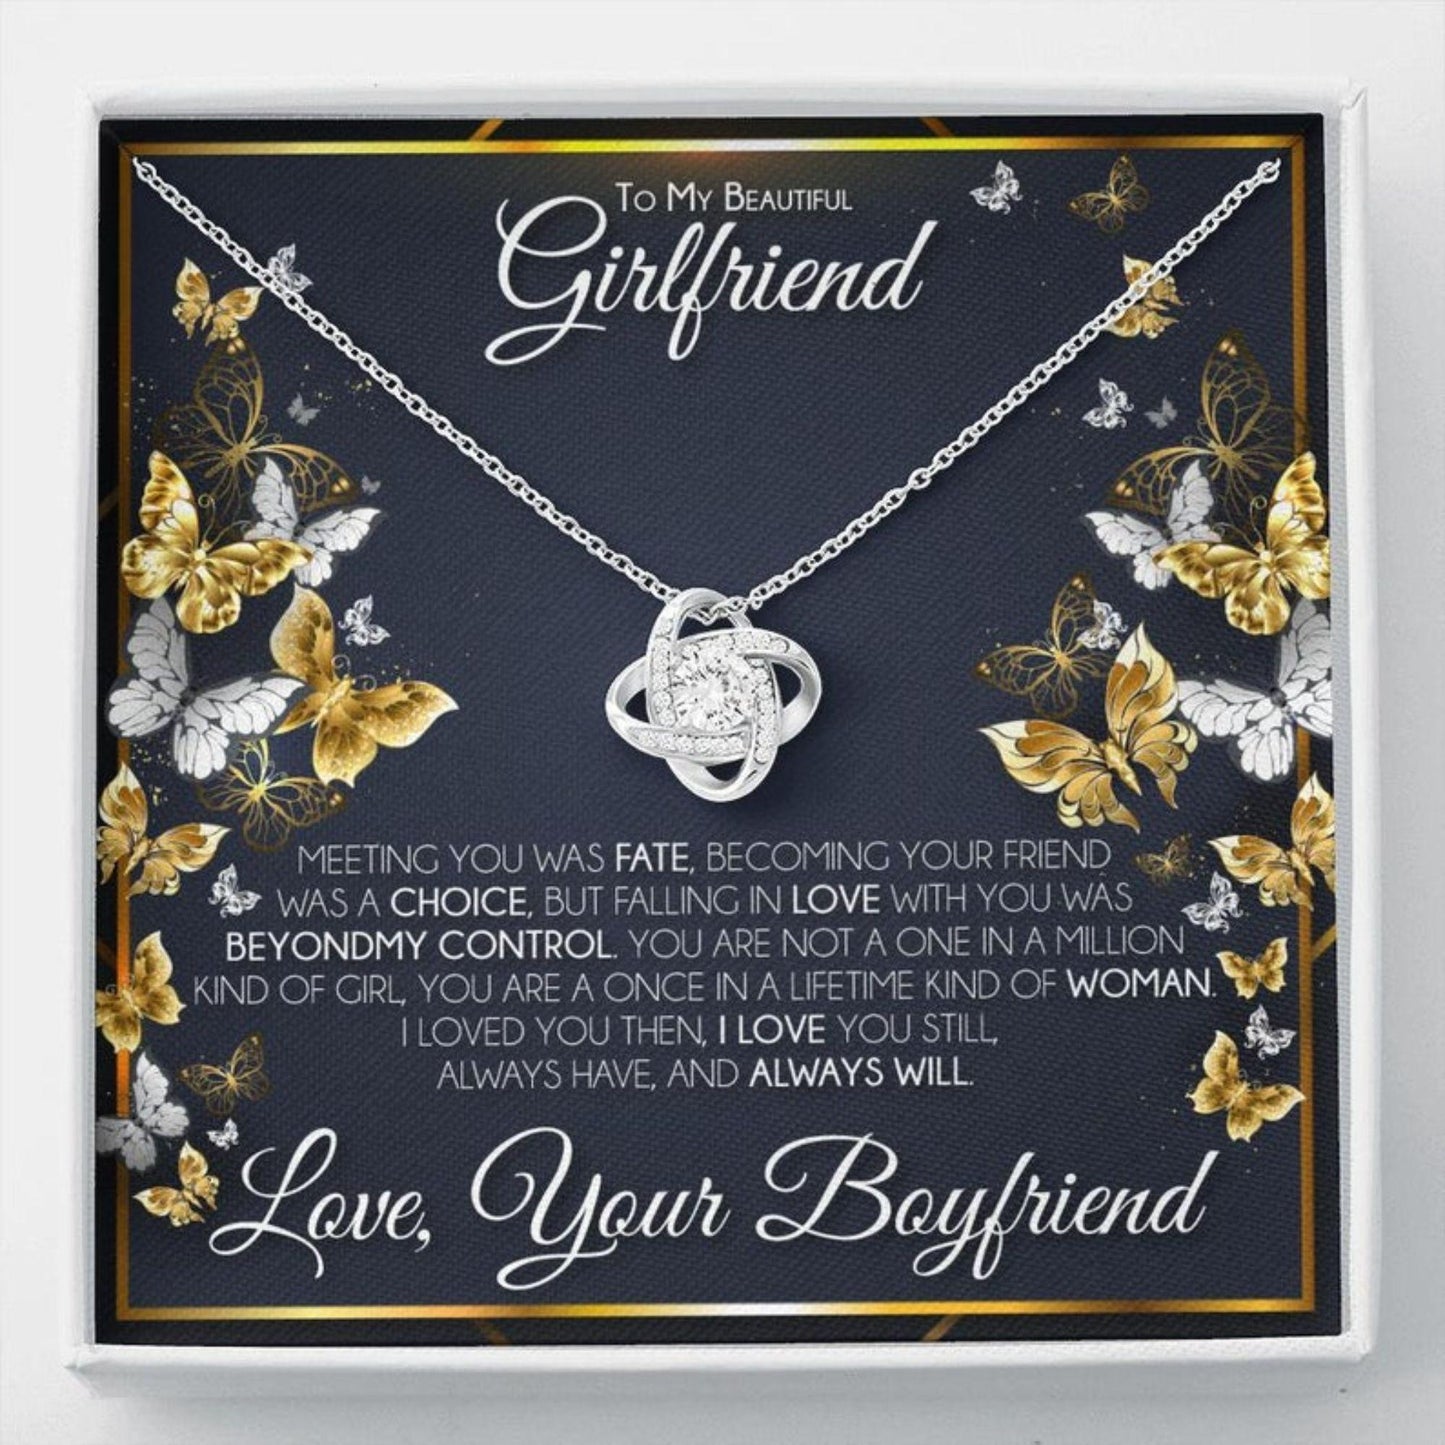 Girlfriend Necklace, Valentine's Day Necklace Gift With Message Card For Girlfriend, Gift For Fiance, Gift For Her, To My Girlfriend